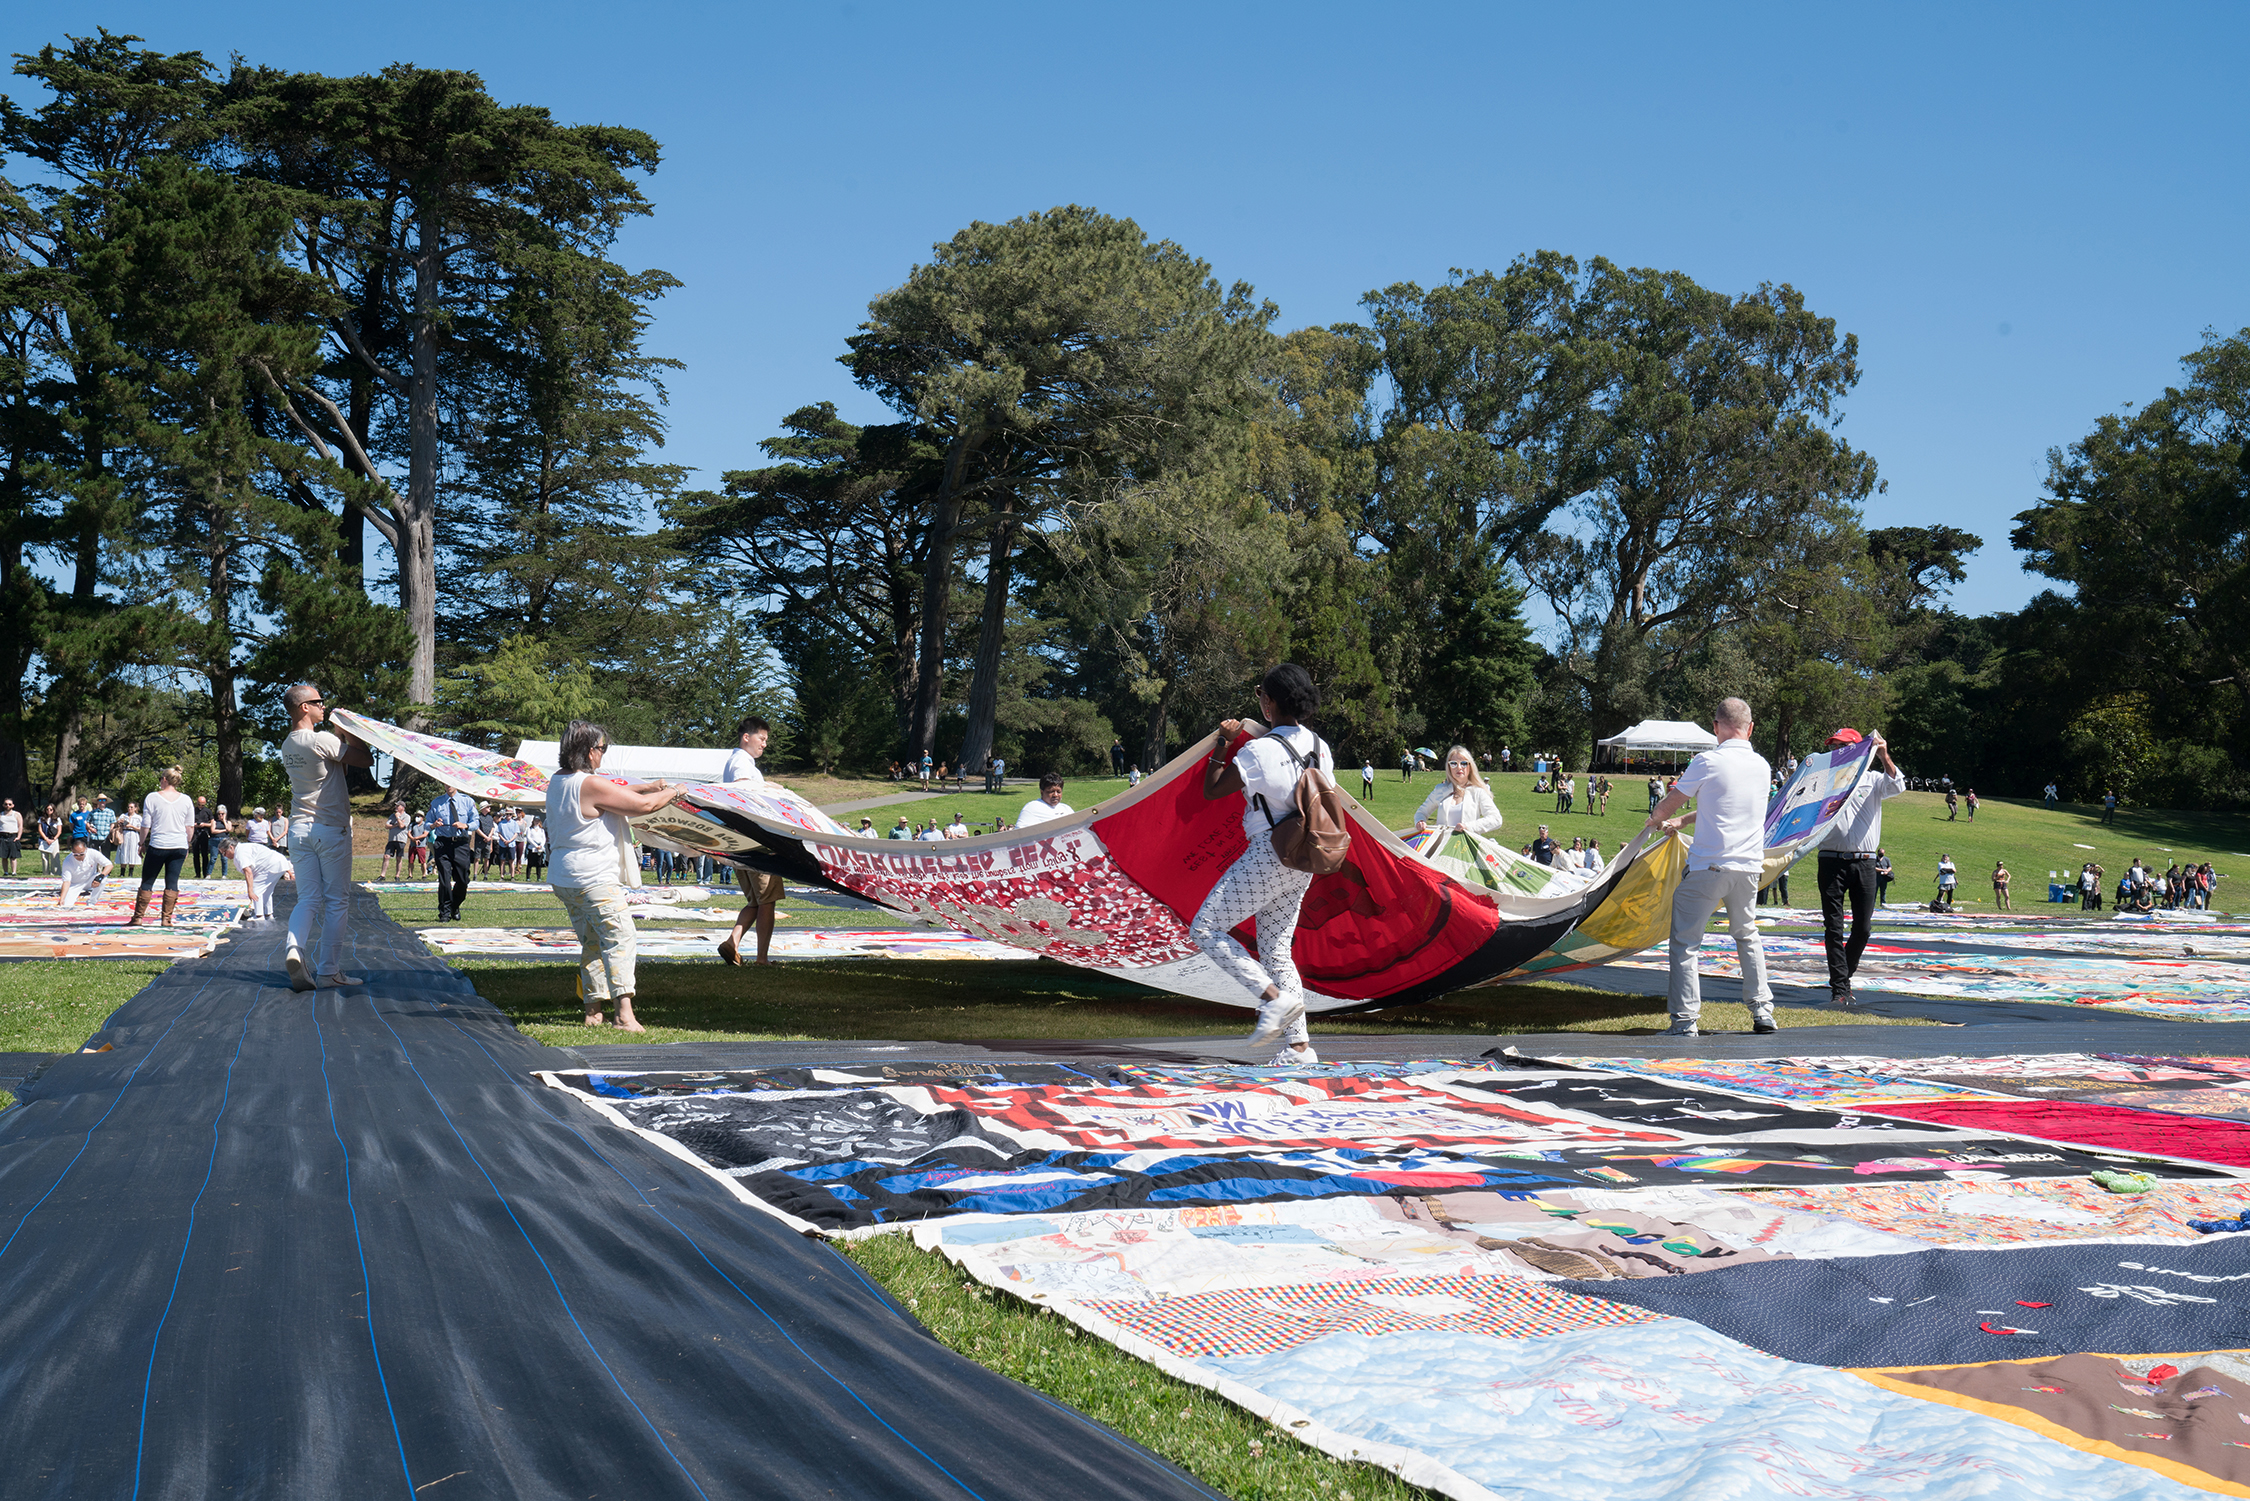 News Story: The AIDS Memorial Quilt: An Alternative Model for Commemoration